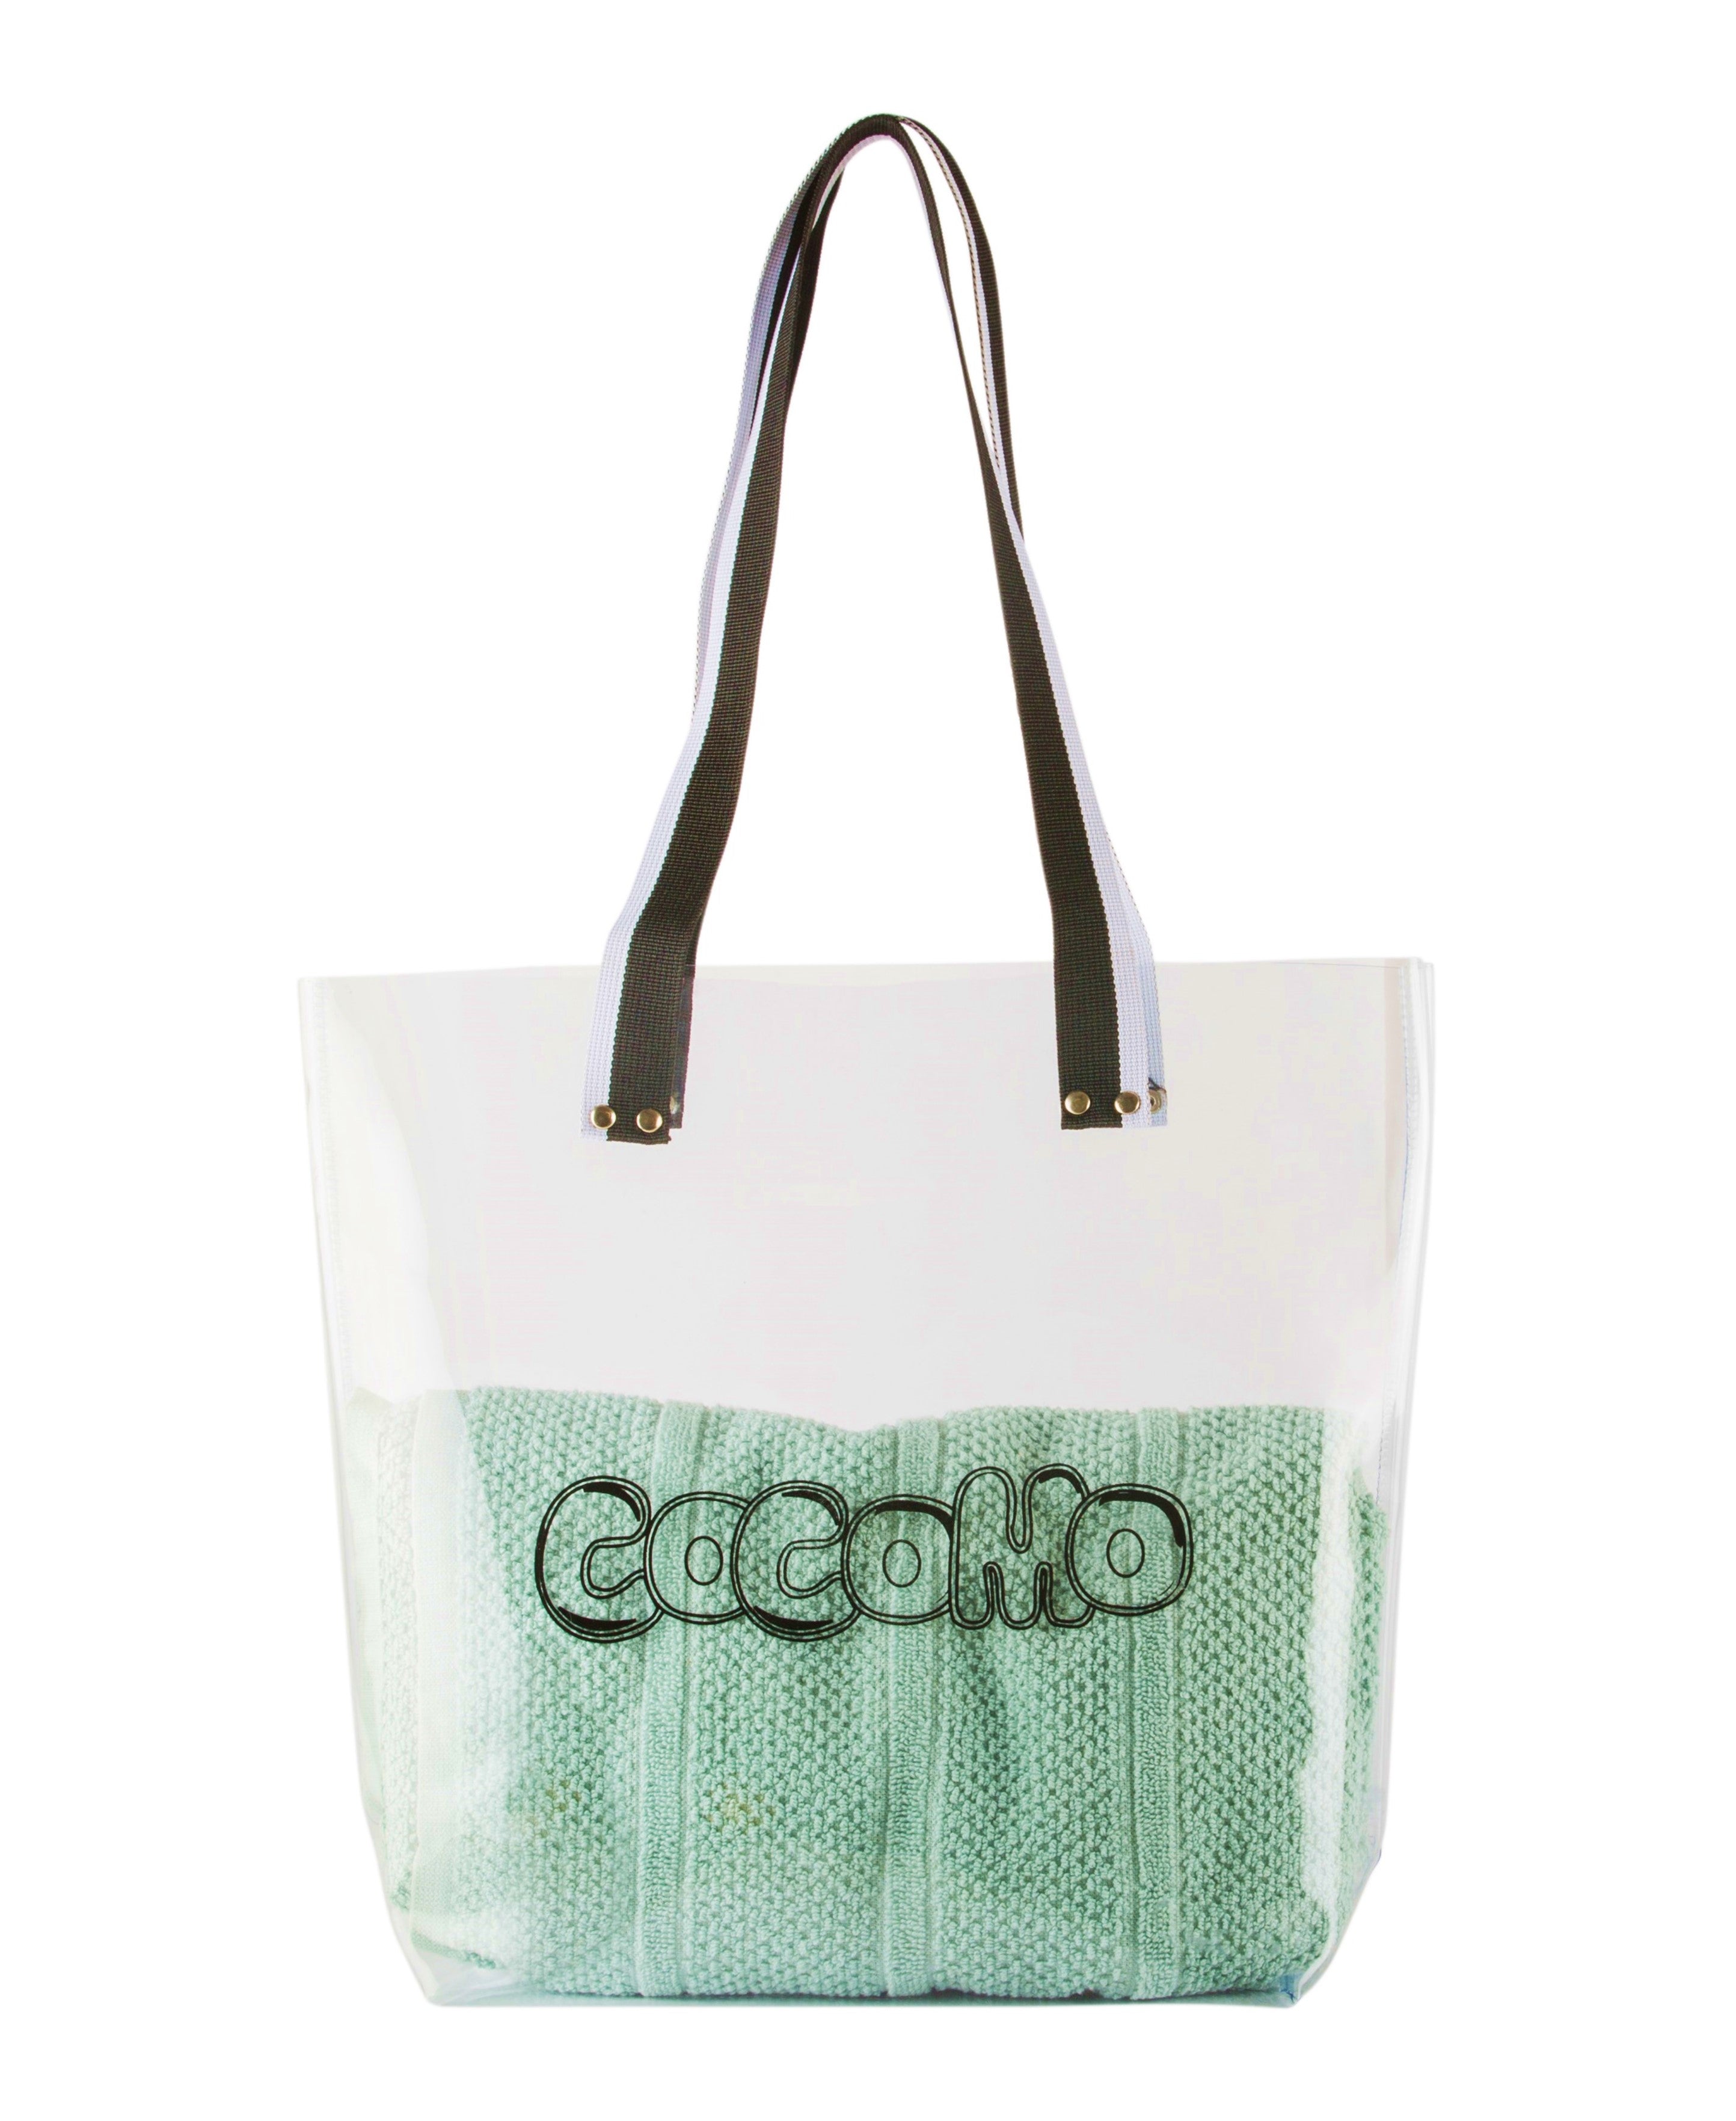 An Extremely Practical Beach Towel Tote Bag - Beach Bliss Living